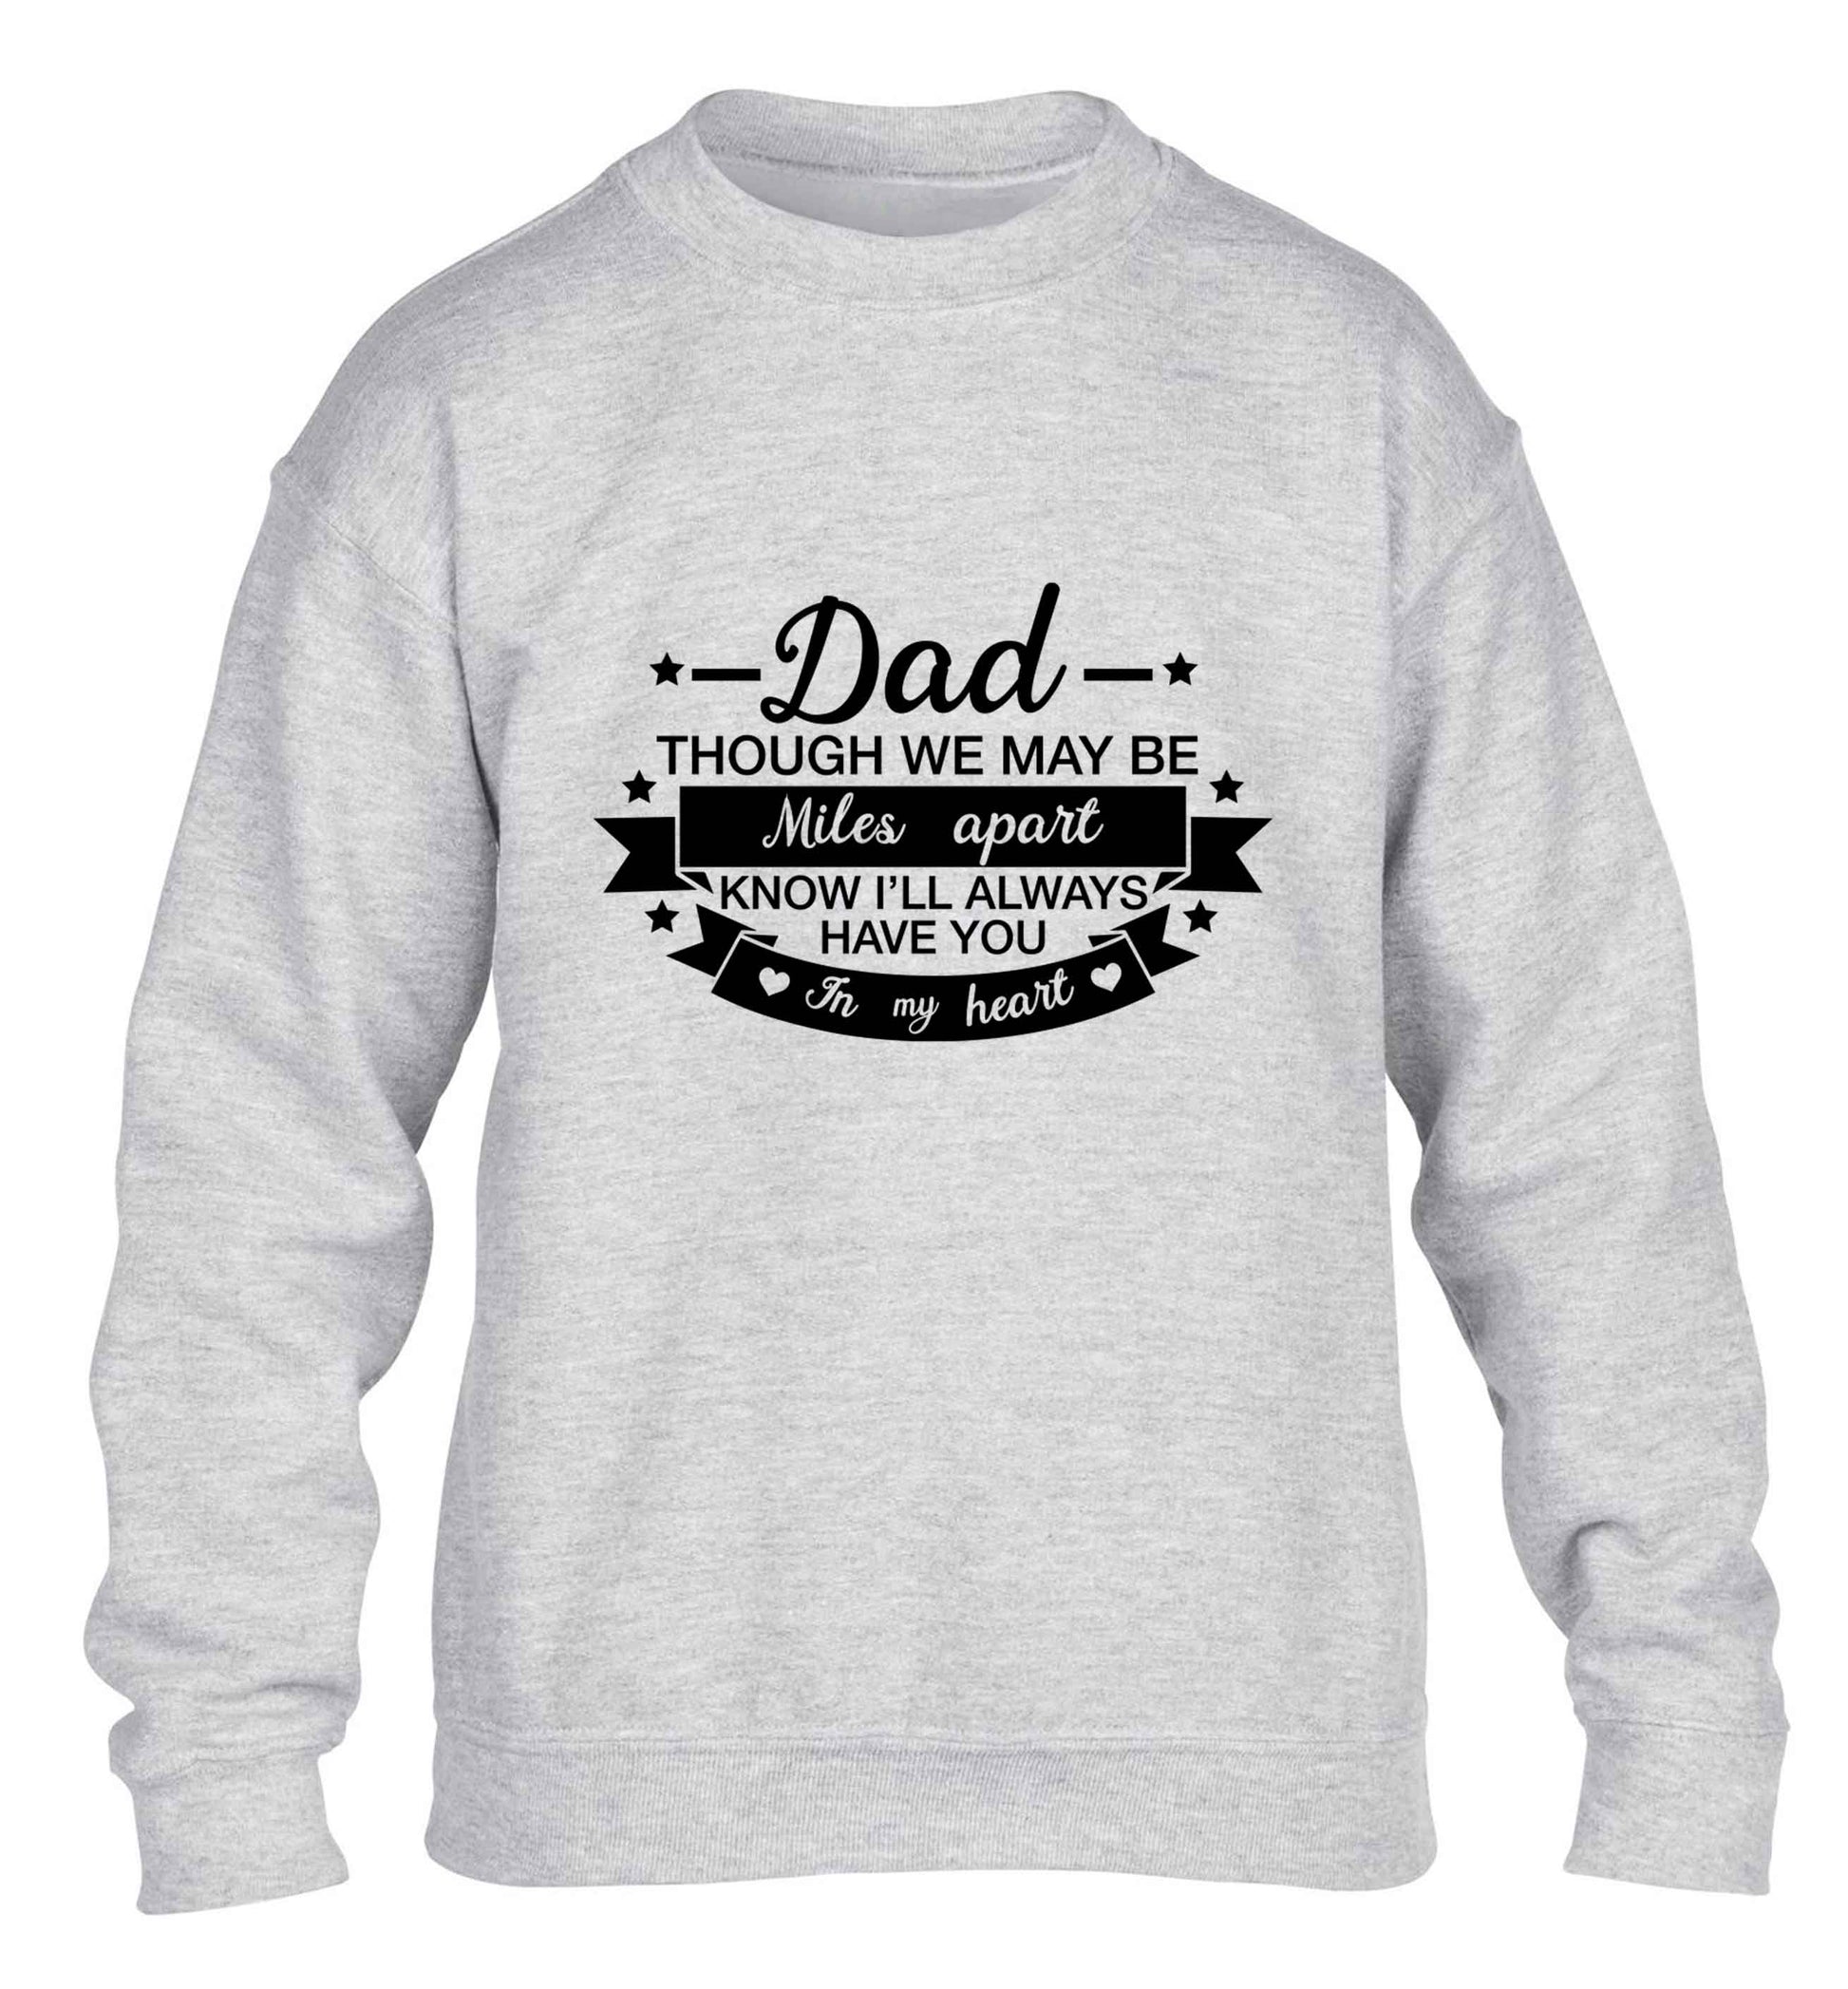 Dad though we are miles apart know I'll always have you in my heart children's grey sweater 12-13 Years